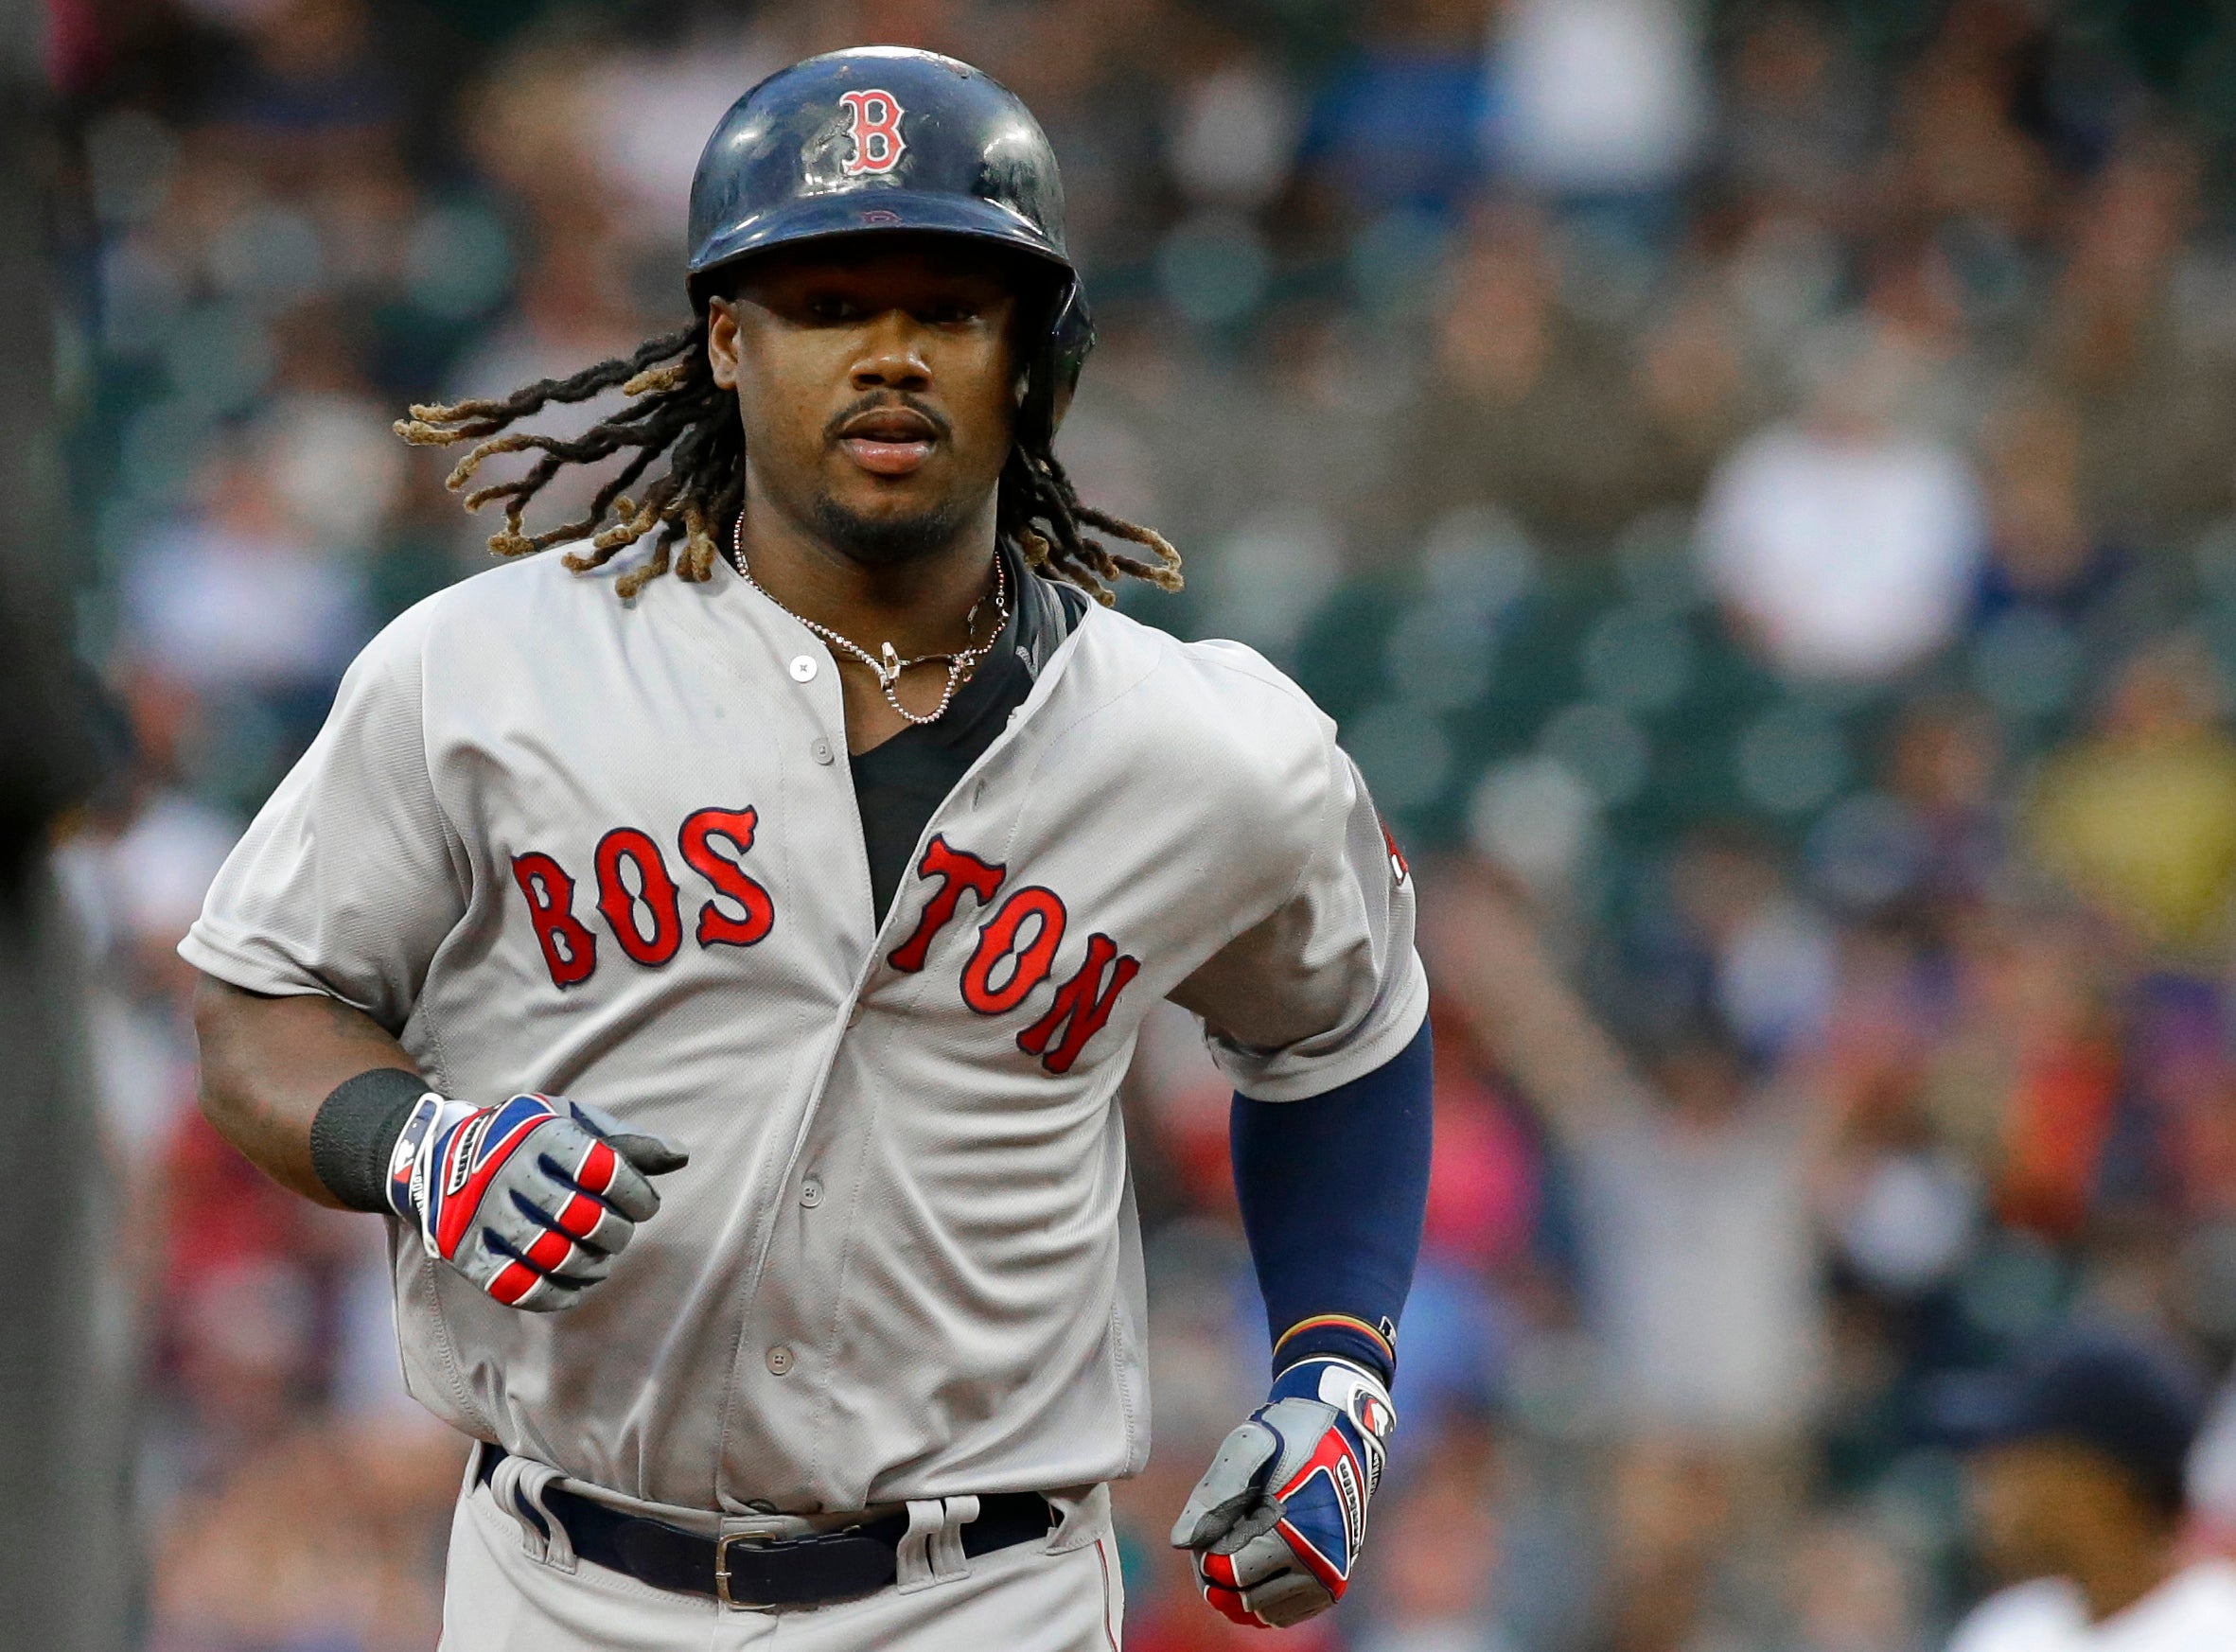 Red Sox 1B Hanley Ramirez out with sprained left wrist